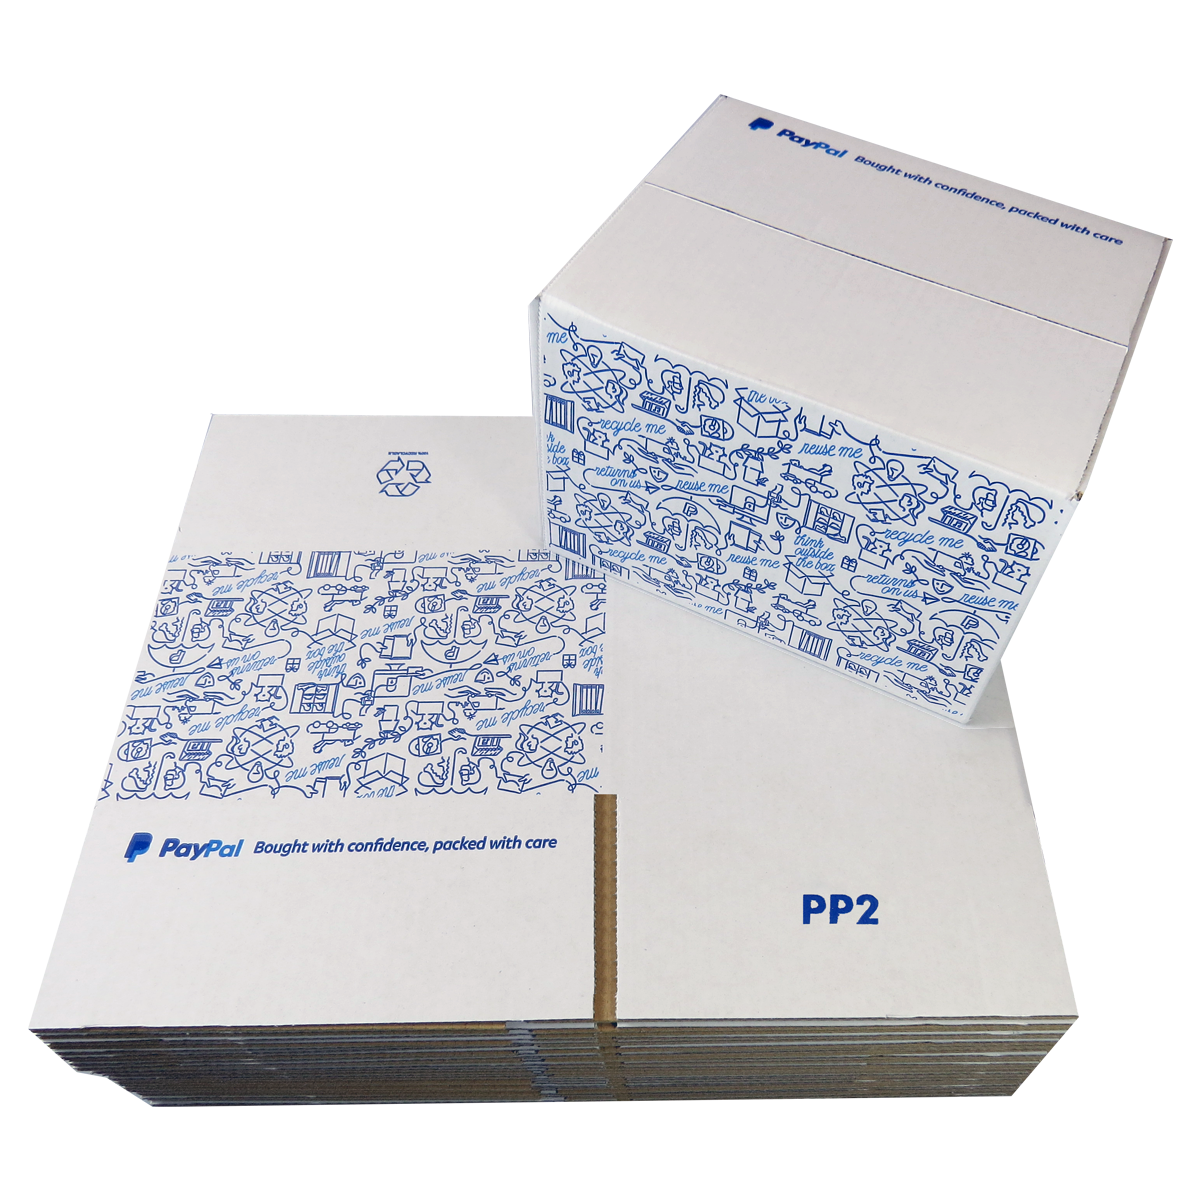 25 x PP2 PayPal Branded Quality White Single Wall Cardboard Postal Mailing Boxes 215x180x135mm